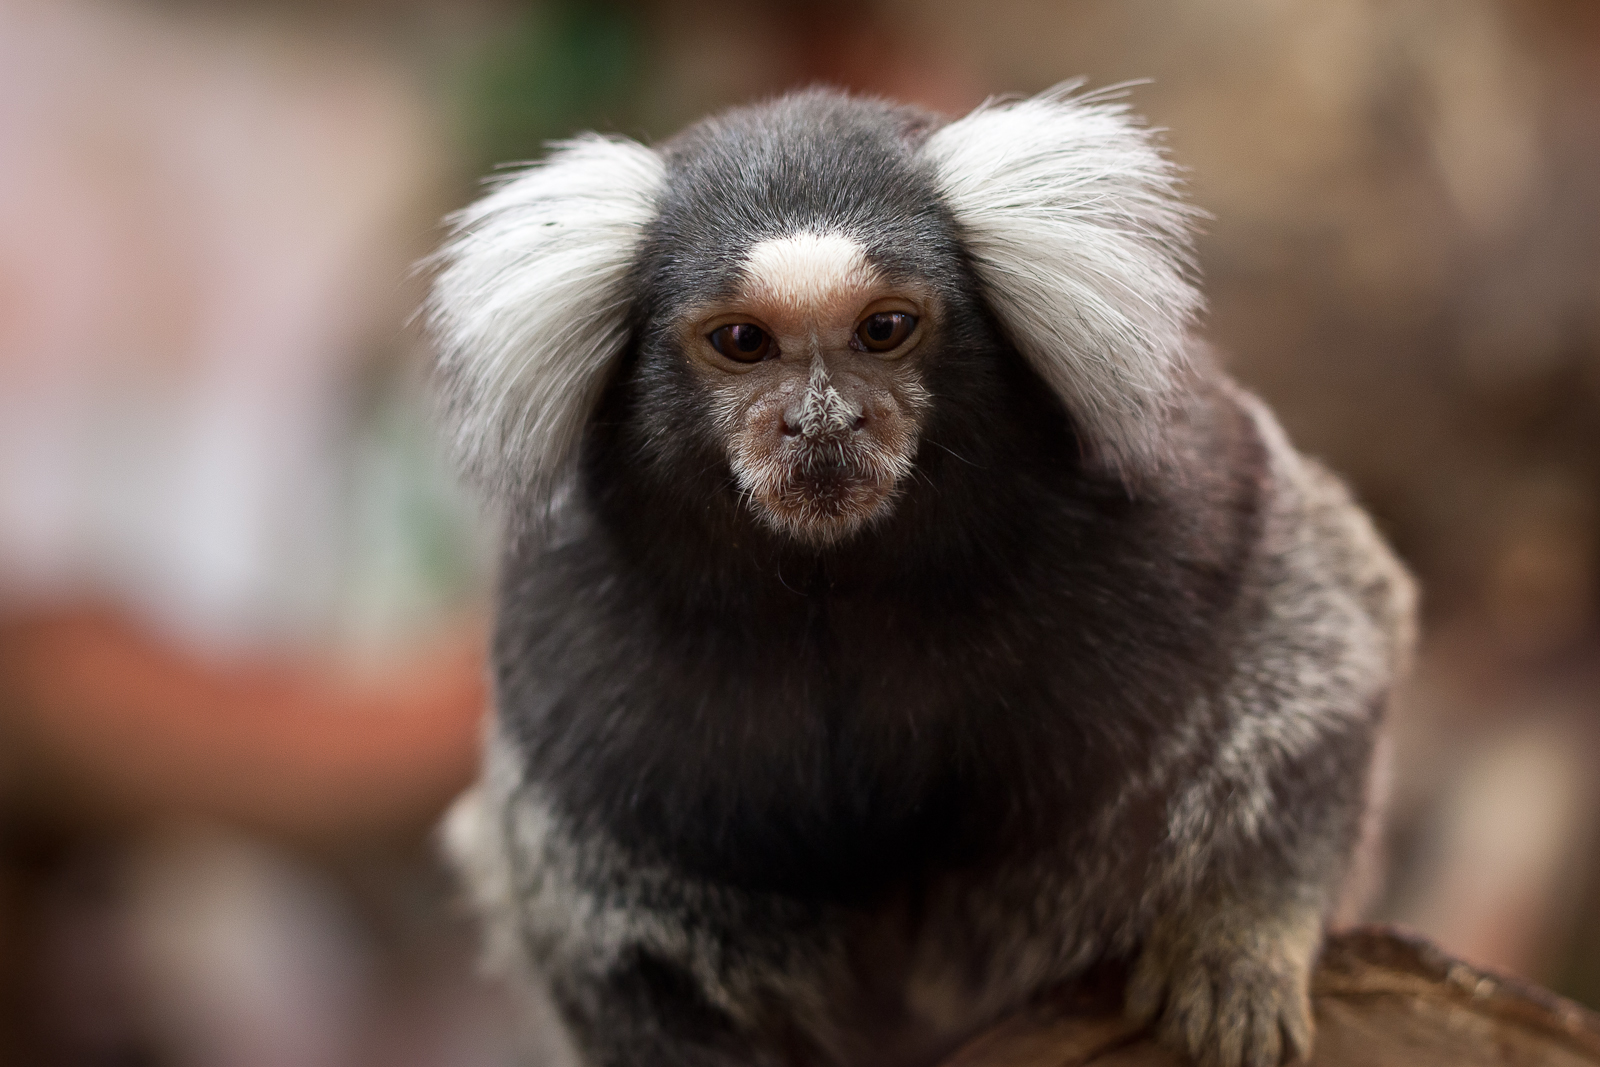 The average lifespan of a wild common marmoset is 12 years.